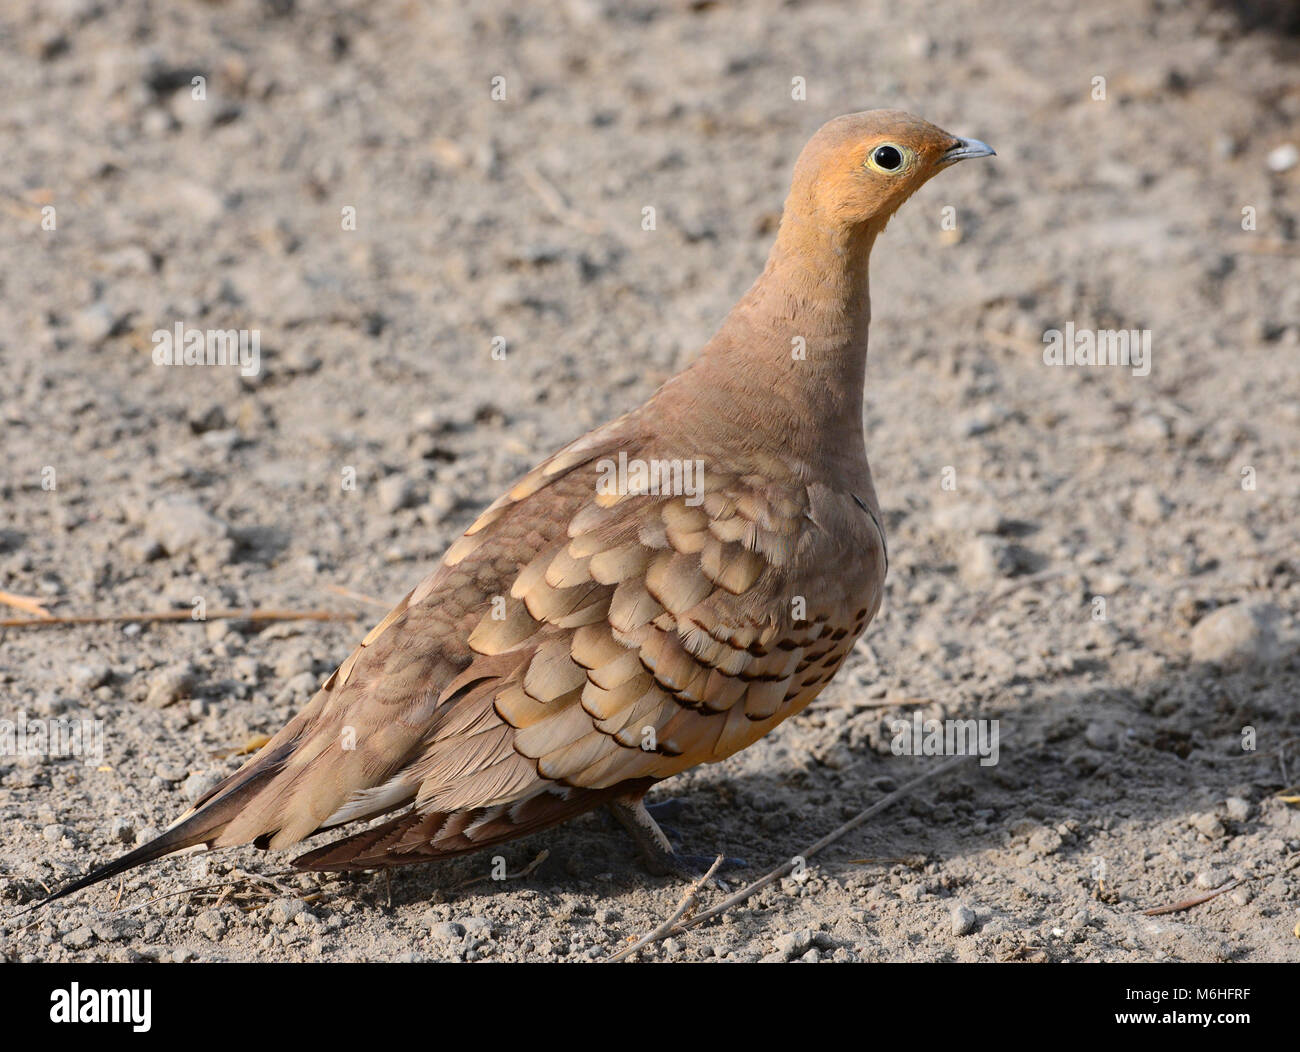 Serengeti National Park in Tanzania, one of the most spectacular wildlife destinations on earth. Chestnut-bellied Sandgrouse carry water in feathers Stock Photo